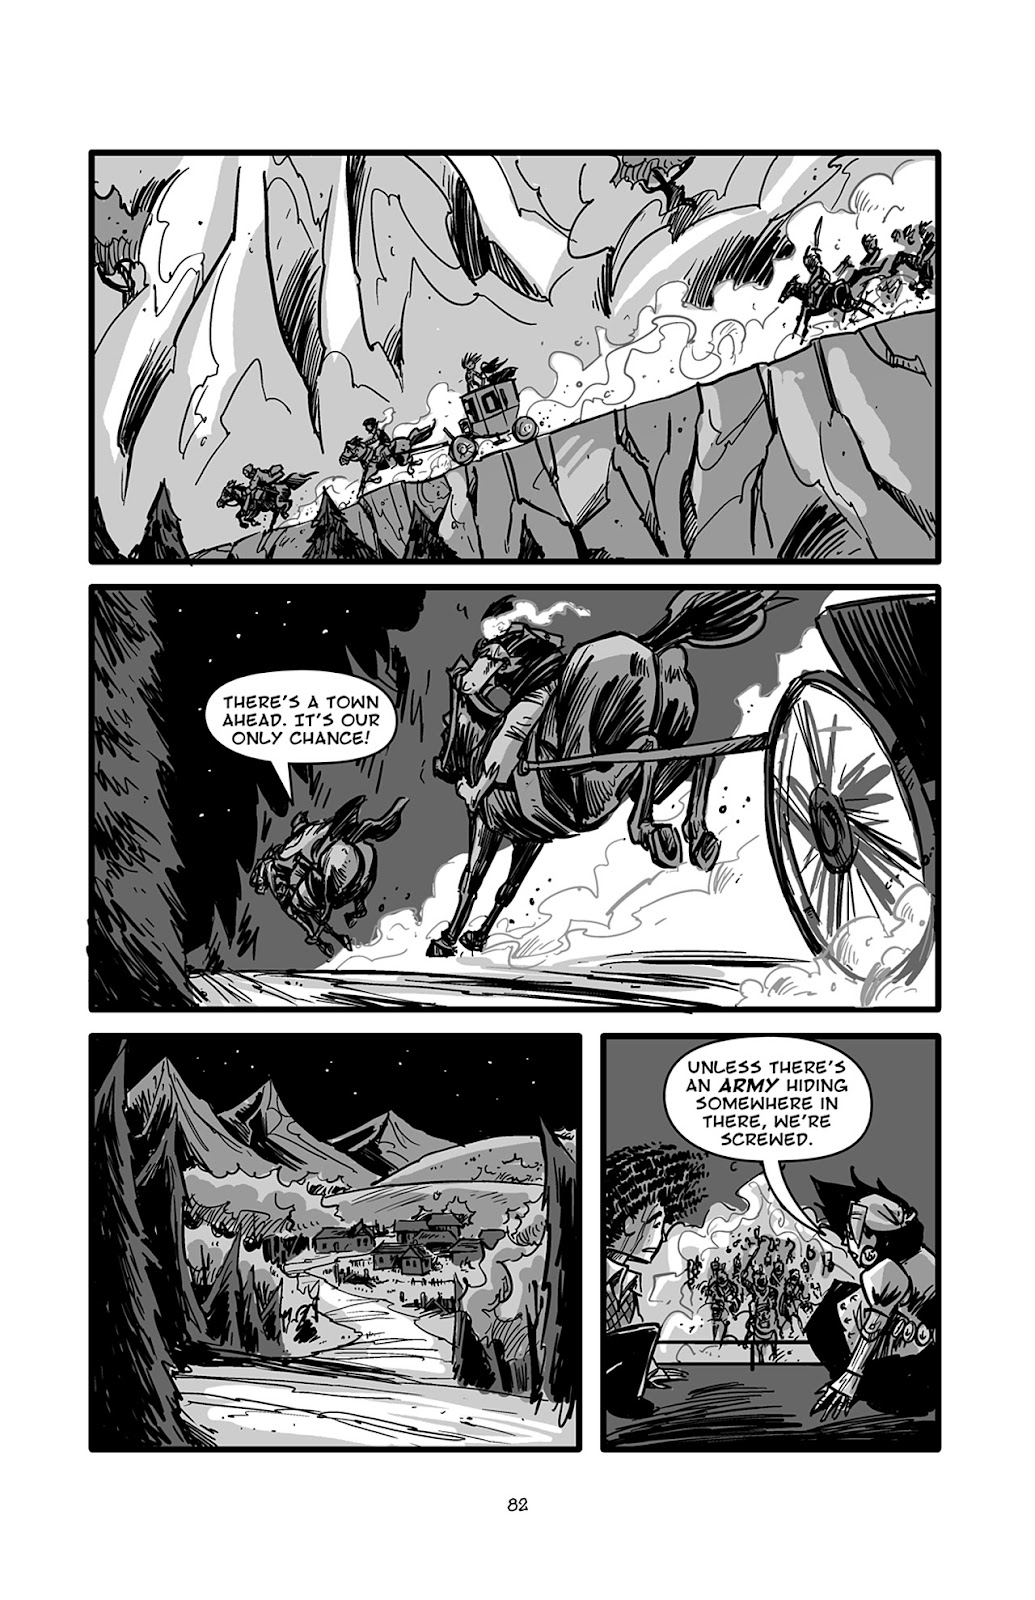 Pinocchio: Vampire Slayer - Of Wood and Blood issue 4 - Page 9